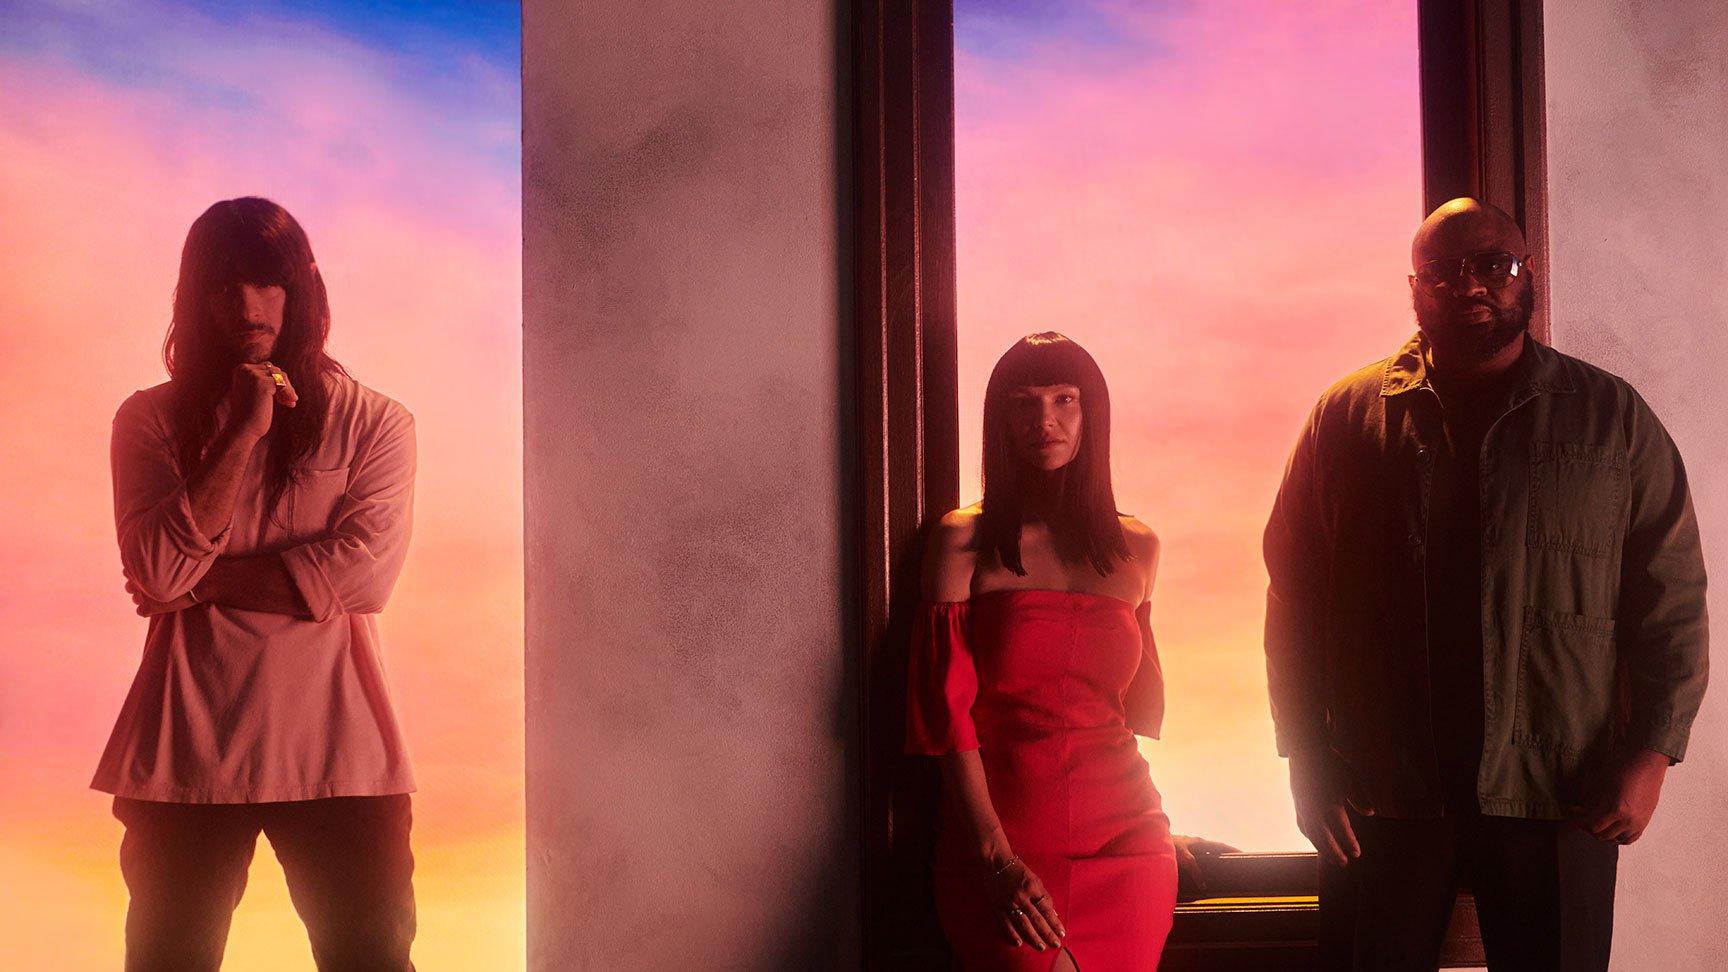 Khruangbin poses against a softly backlit pastel background featuring a sunset